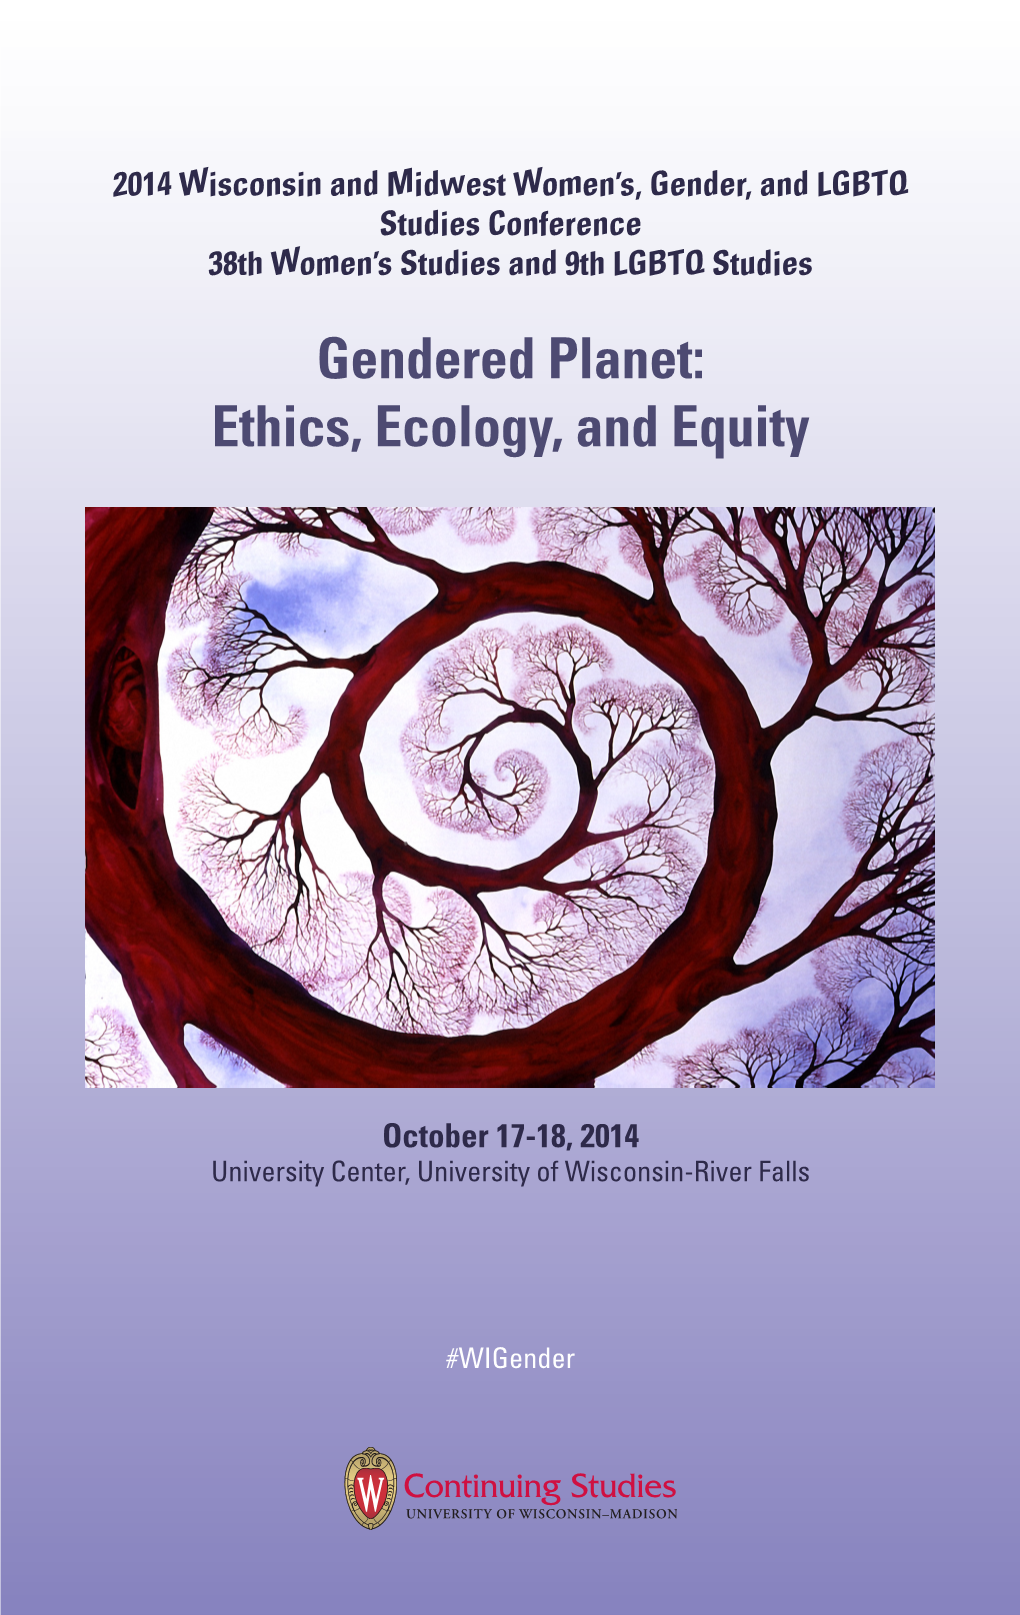 Gendered Planet: Ethics, Ecology, and Equity